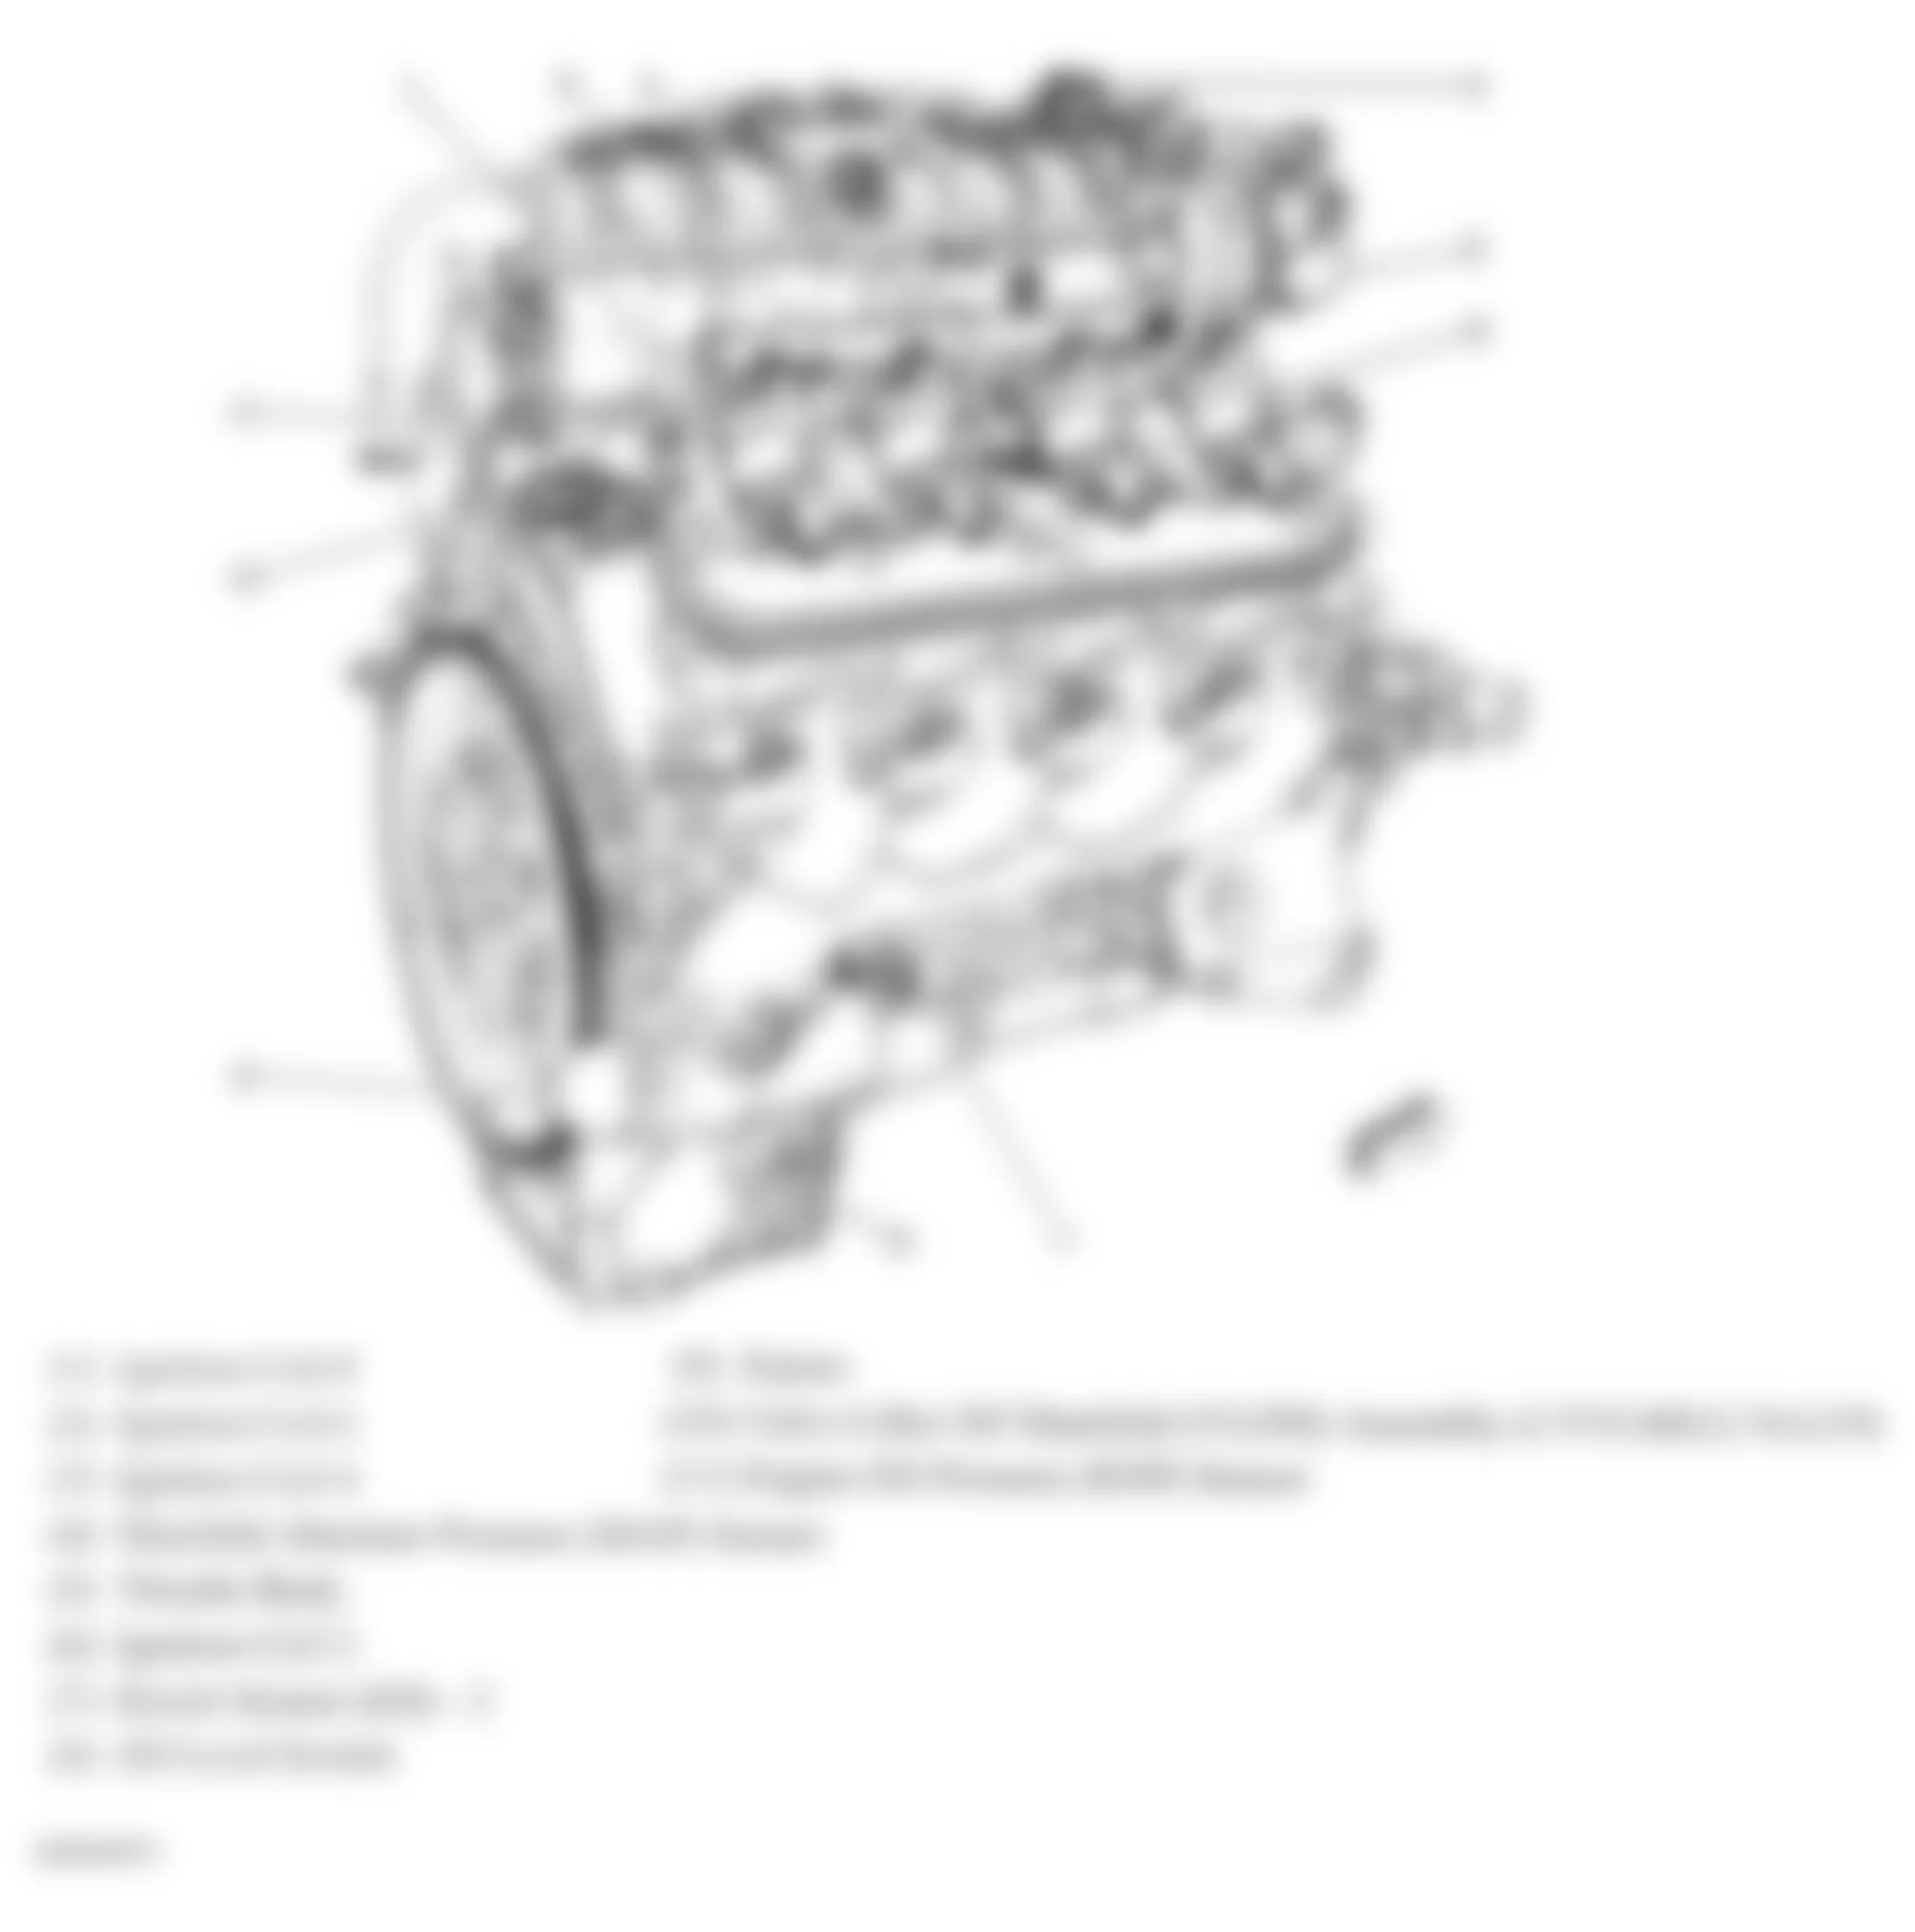 GMC Sierra 1500 2007 - Component Locations -  Right Side Of Engine (4.8L, 5.3L, 6.0L & 6.2L)